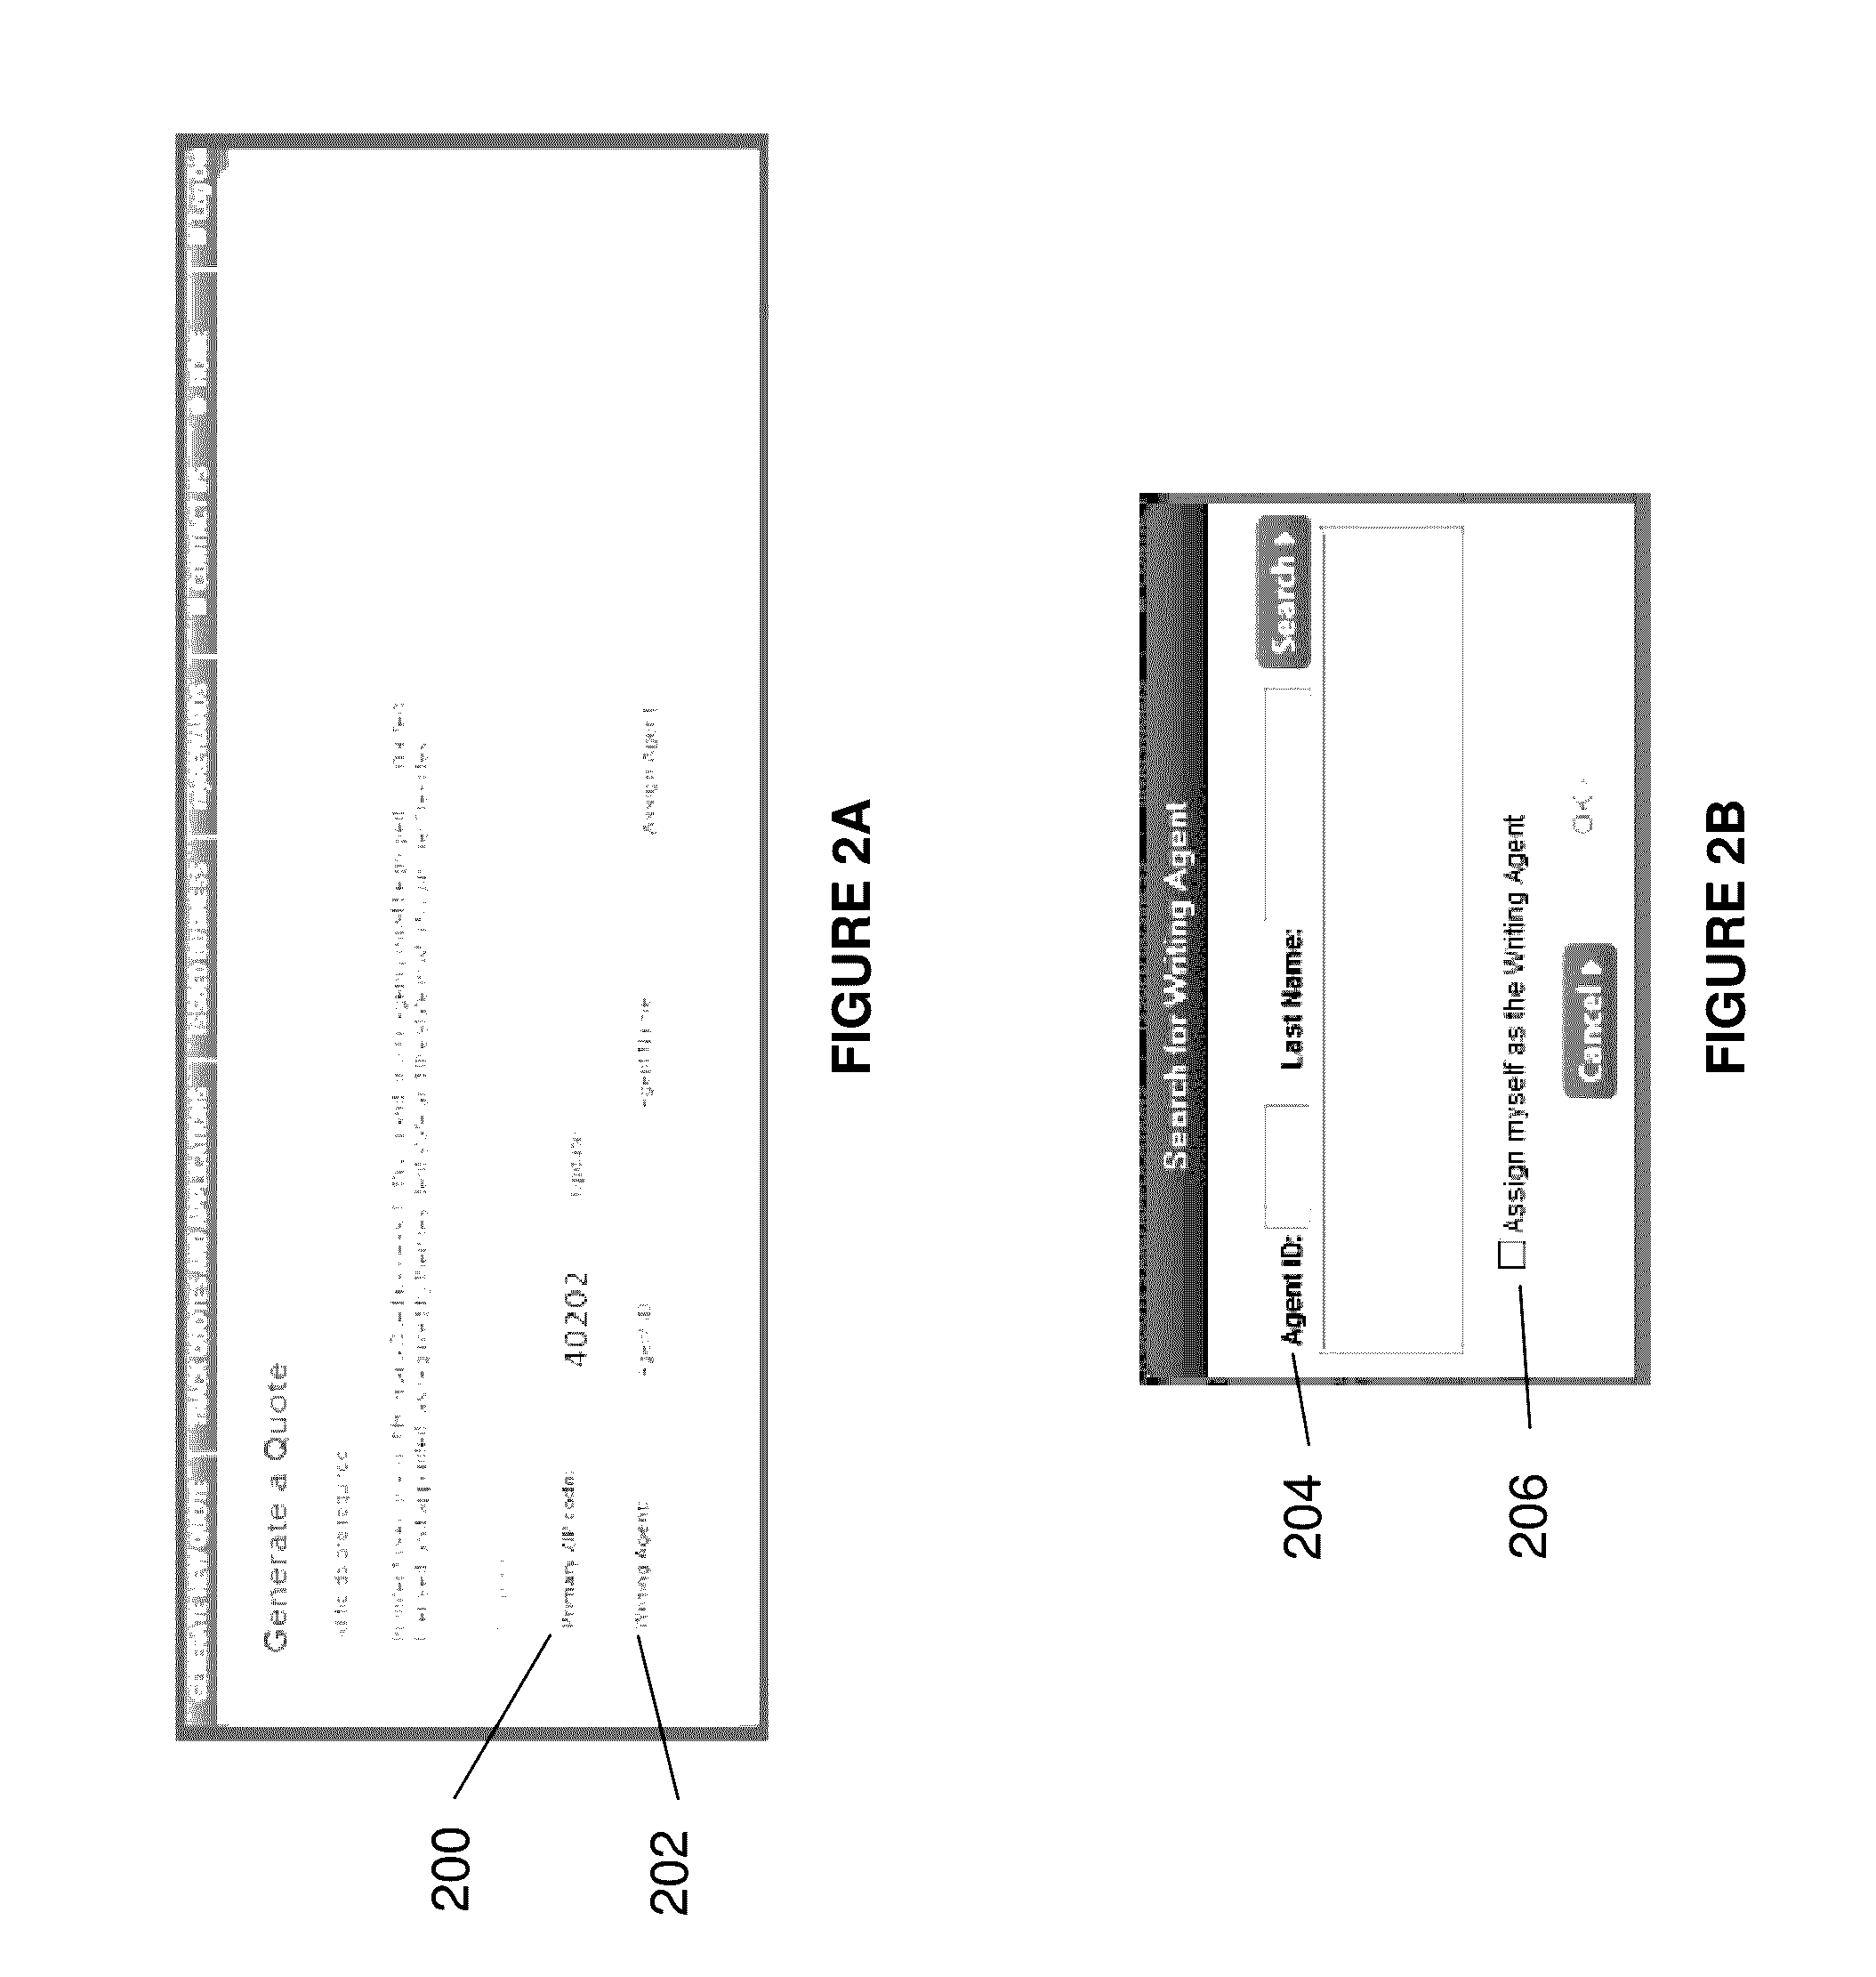 Integrated insurance product quote system and method